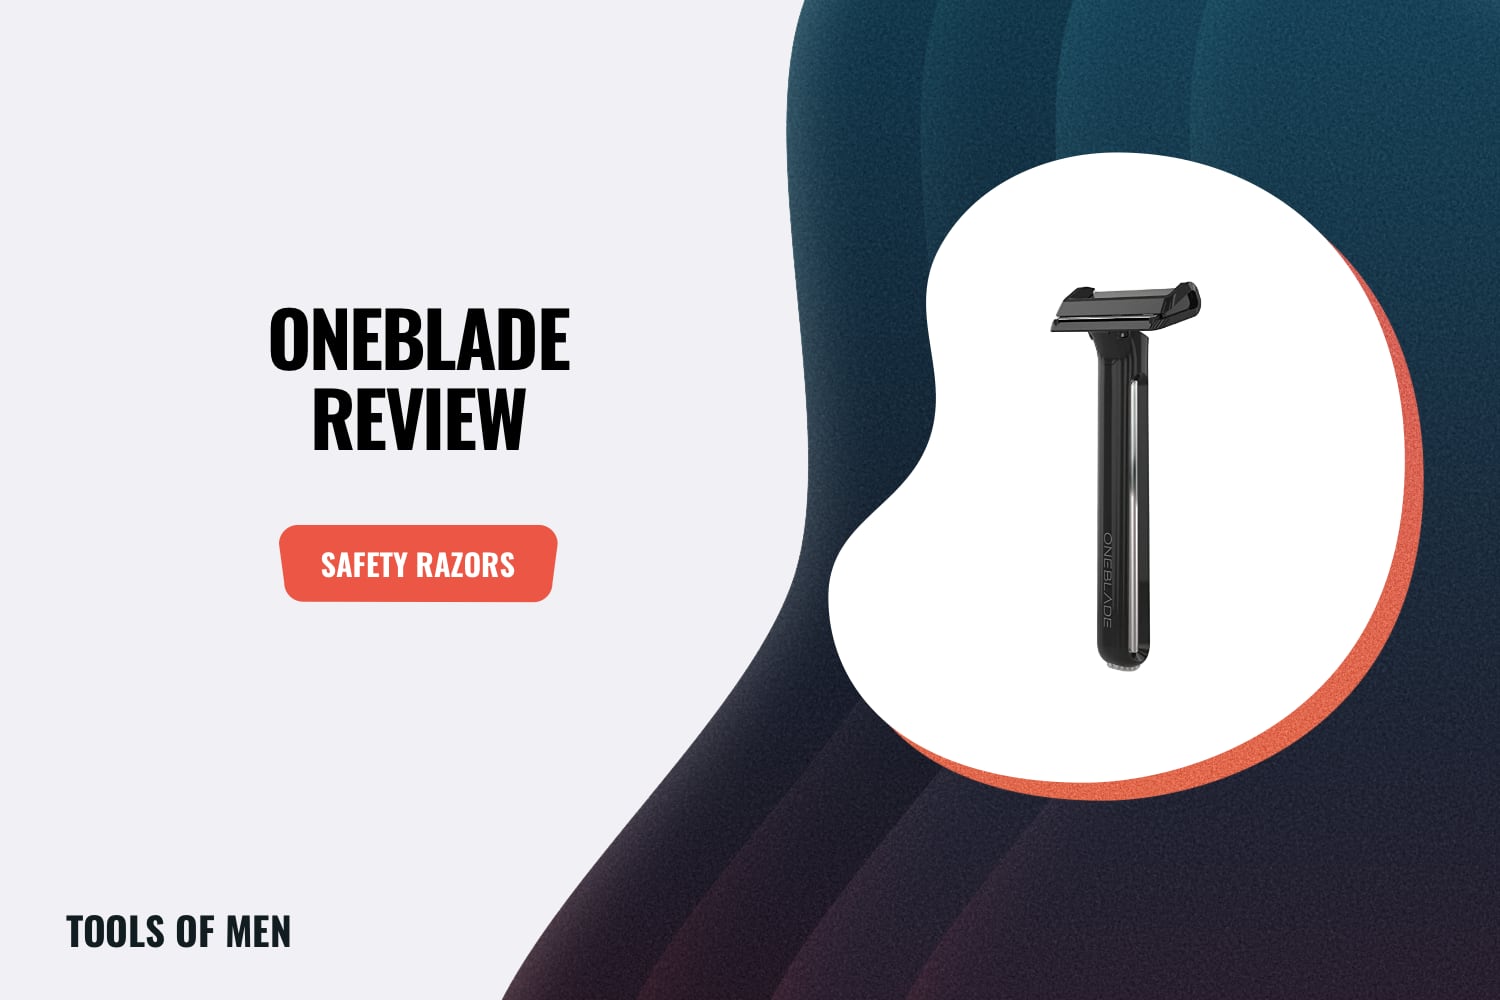 Oneblade Review feature image